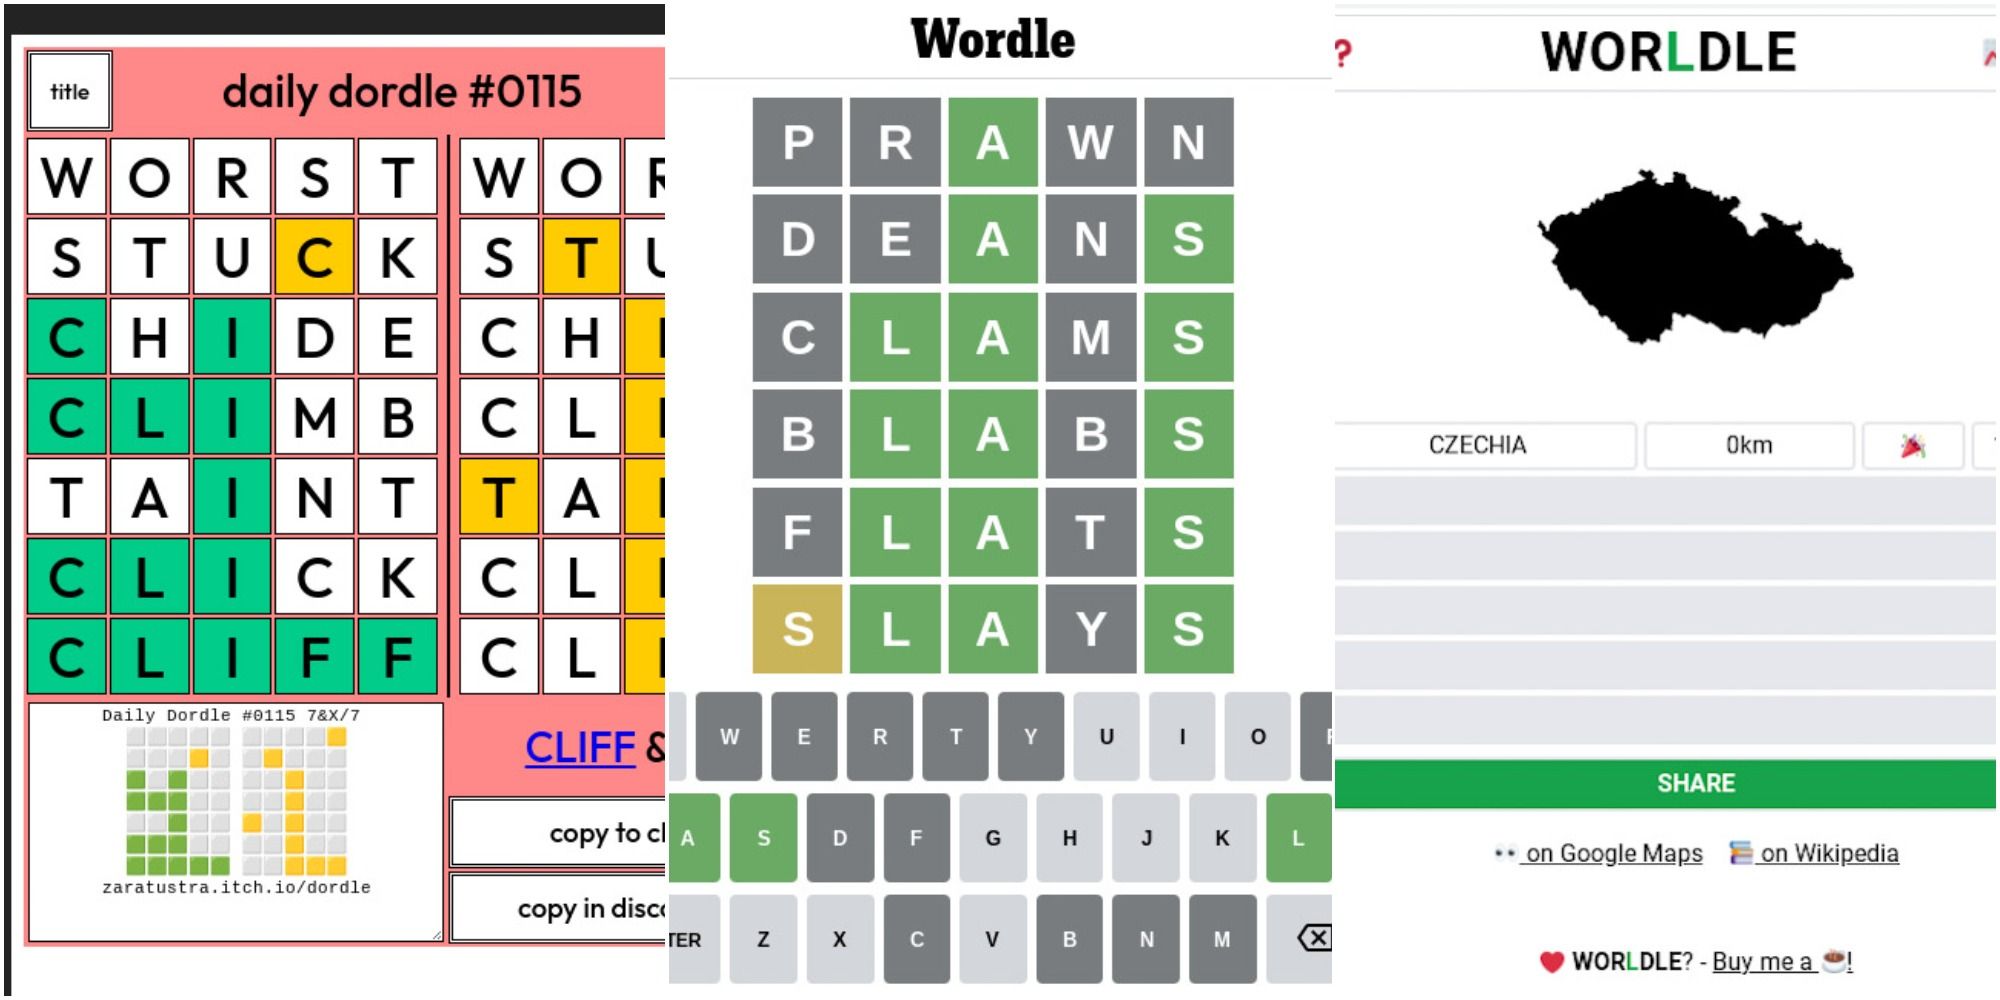 wordle like games feature with worldle and dordle